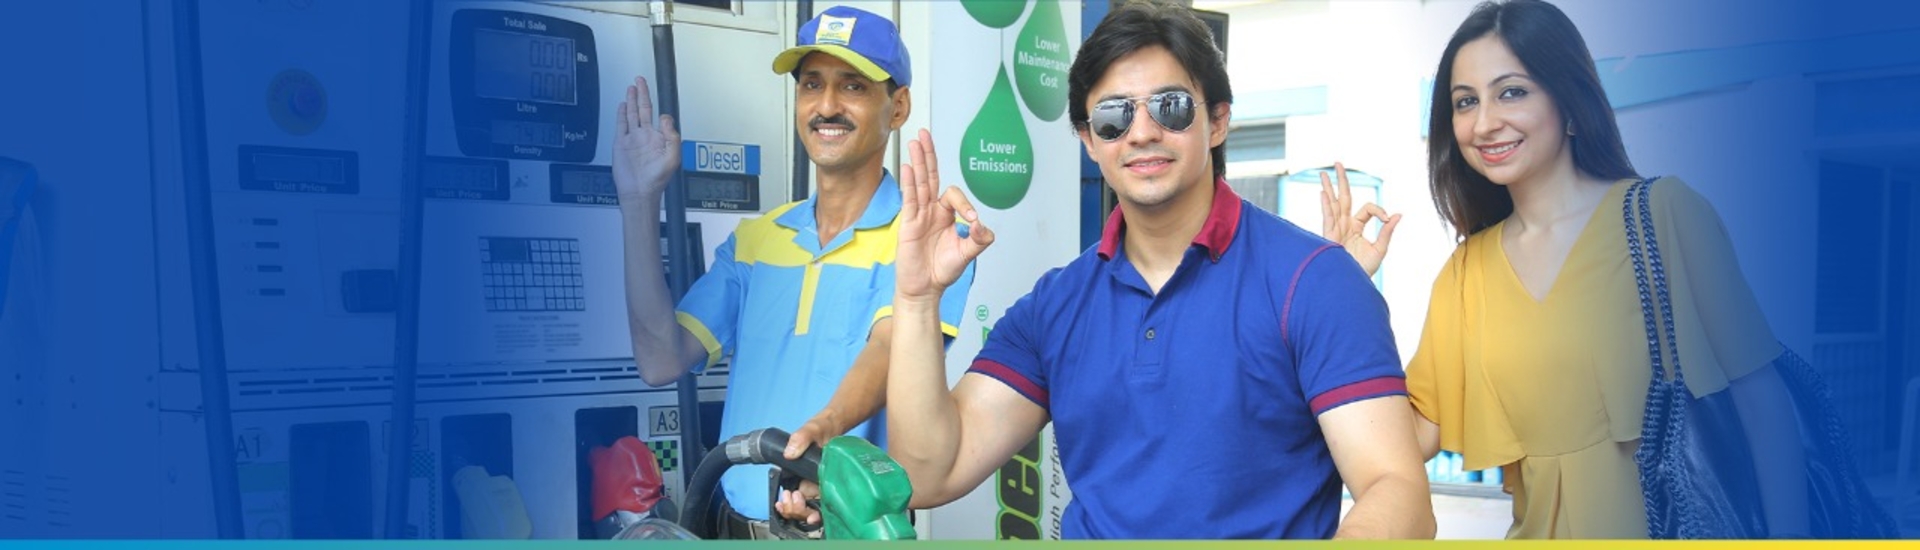 Over 20 Million customers visit our Fuel Stations everday